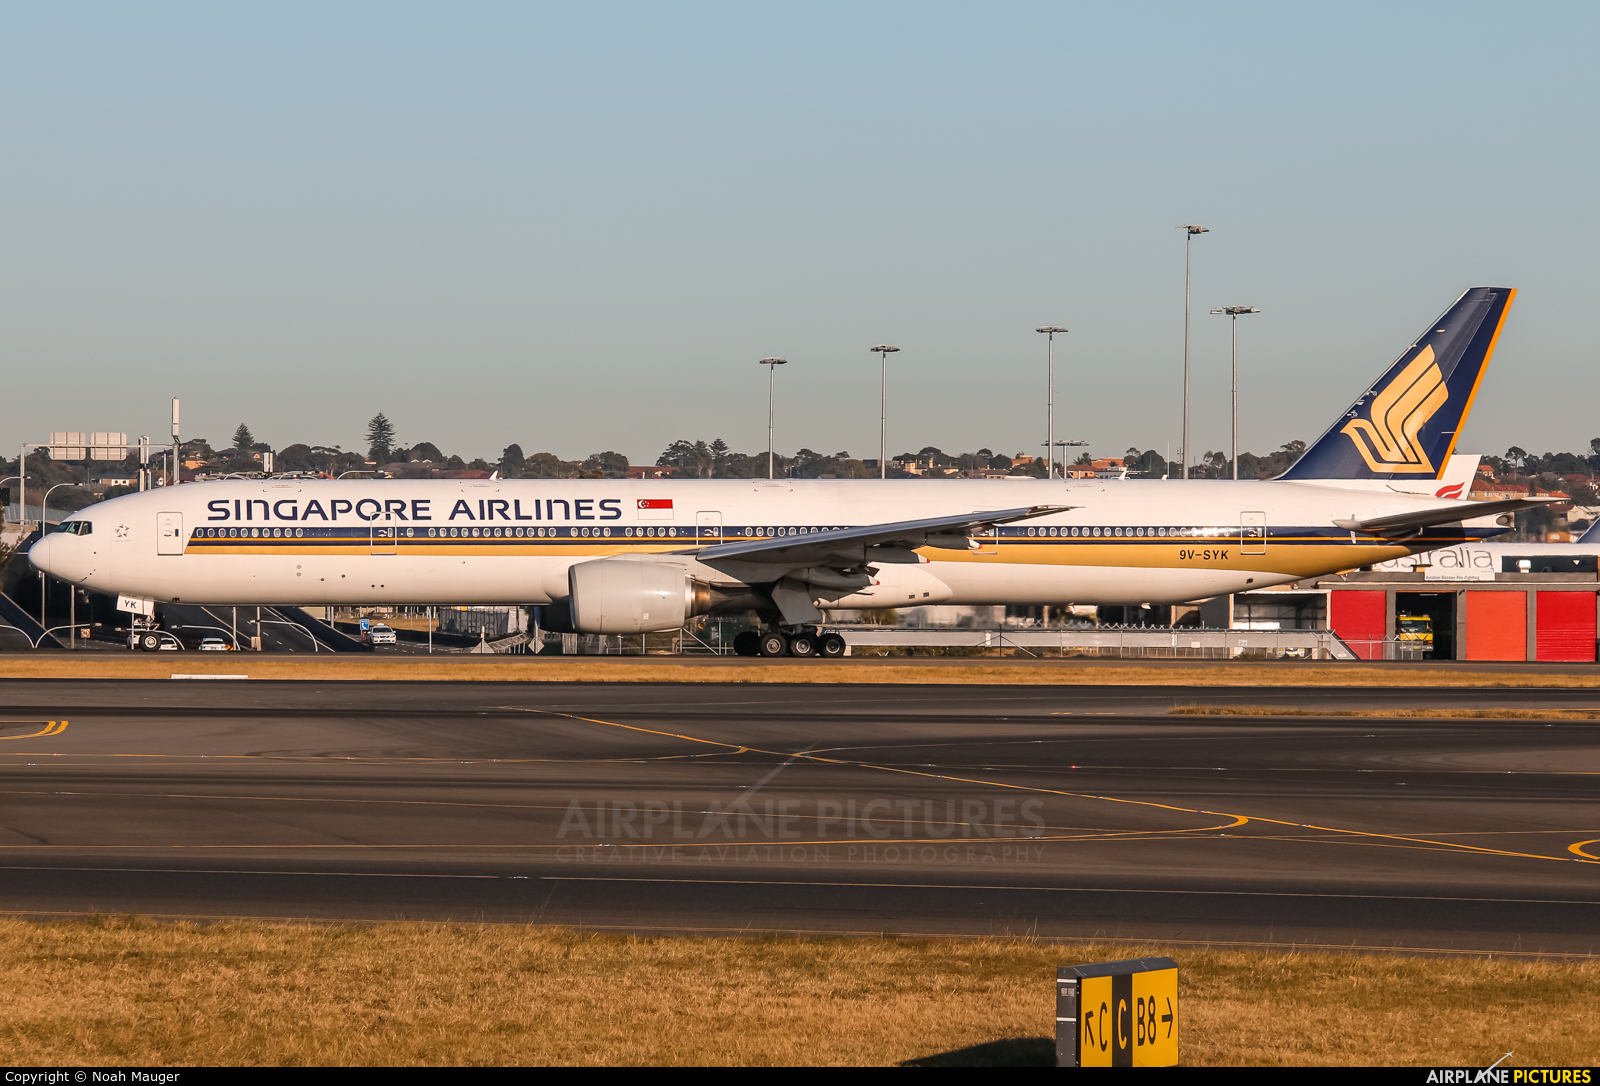 Singapore Airlines 9V-SYK aircraft at Sydney - Kingsford Smith Intl, NSW